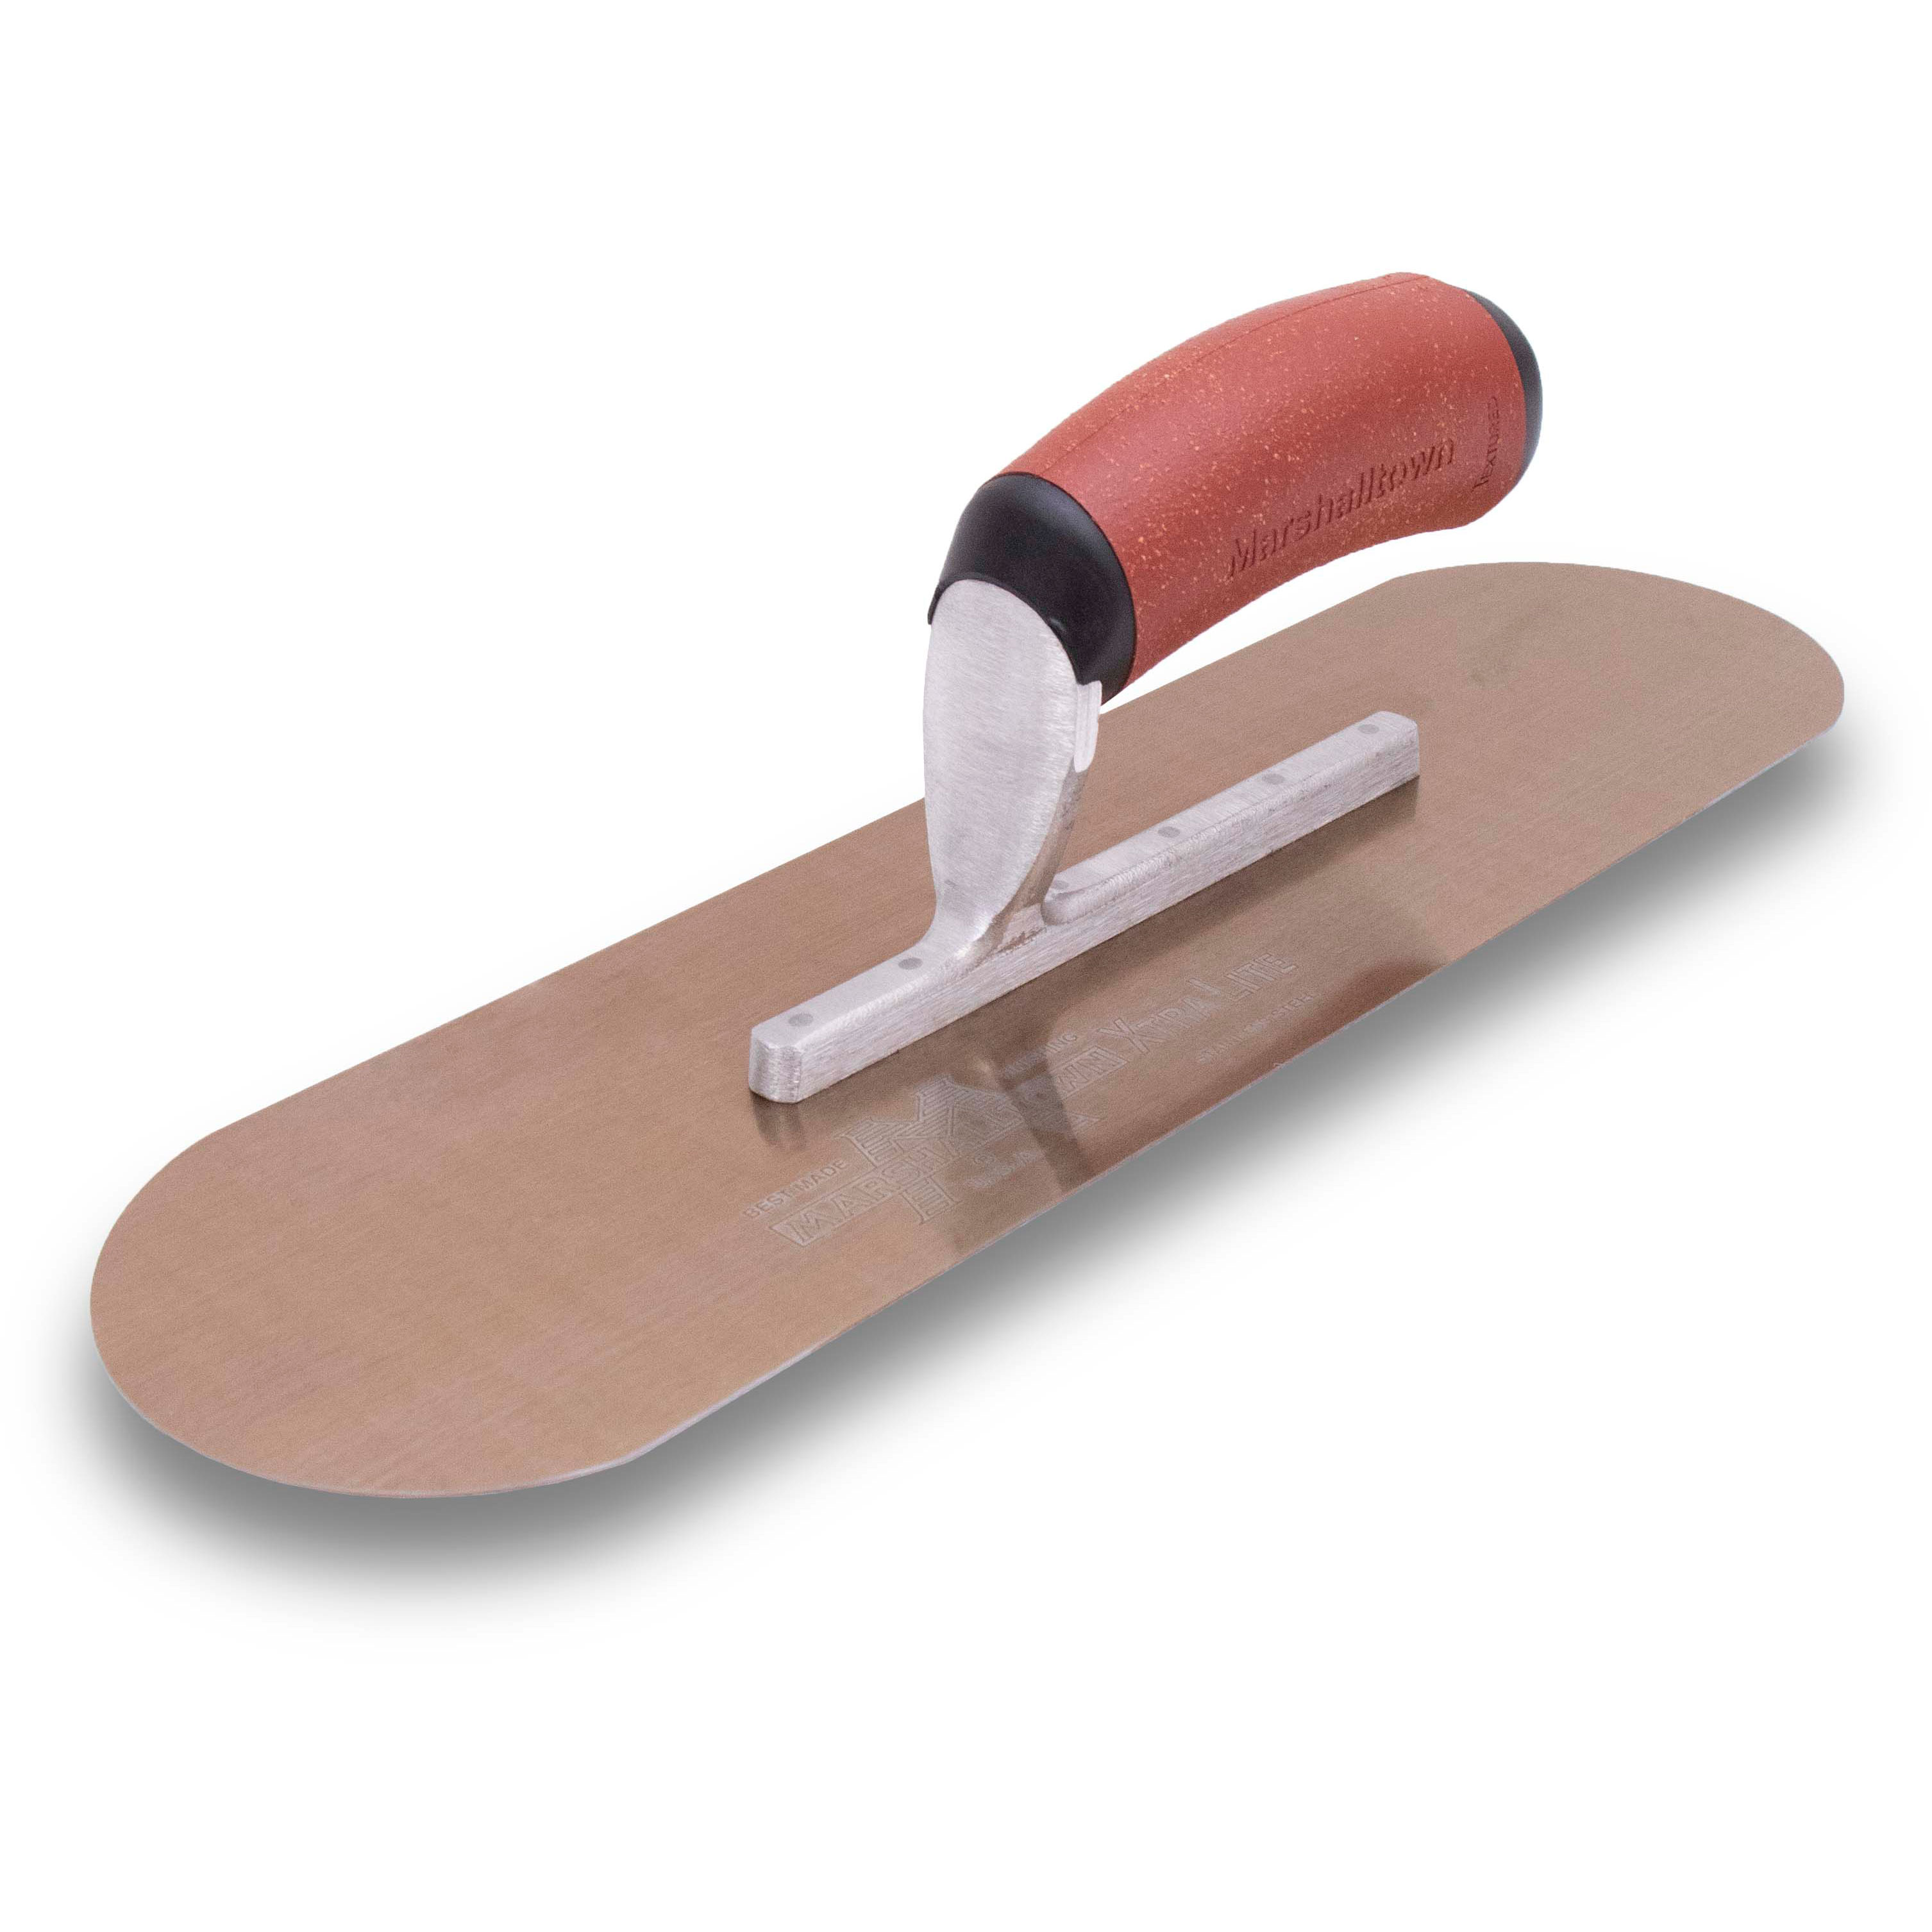 Marshalltown SP10GSDC 10in x 3in Golden Stainless-Steel Pool Trowel with DuraCork Handle SP10GSDC